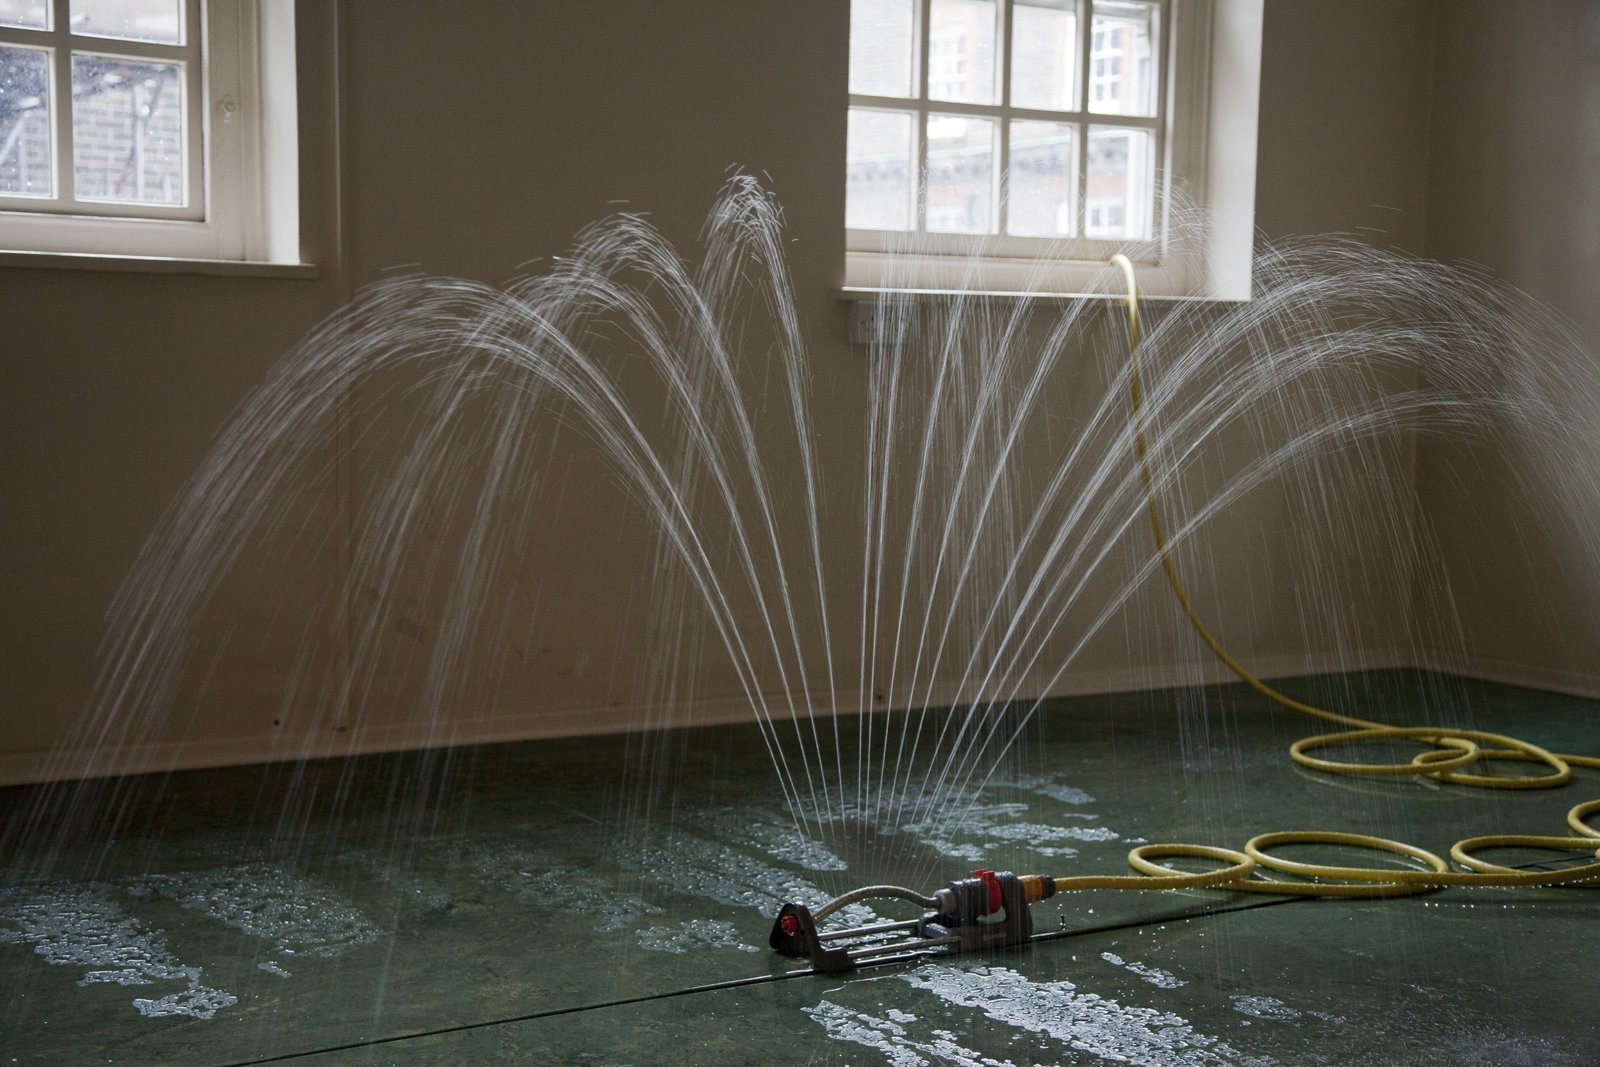 Abbas Akhavan, Study for a Garden: Fountain, 2012, oscillating water sprinkler, pump, hose, pvc pond liner, water, dimensions variable. Installation view, Study for a Garden, Delfina Foundation, London, UK, 2012